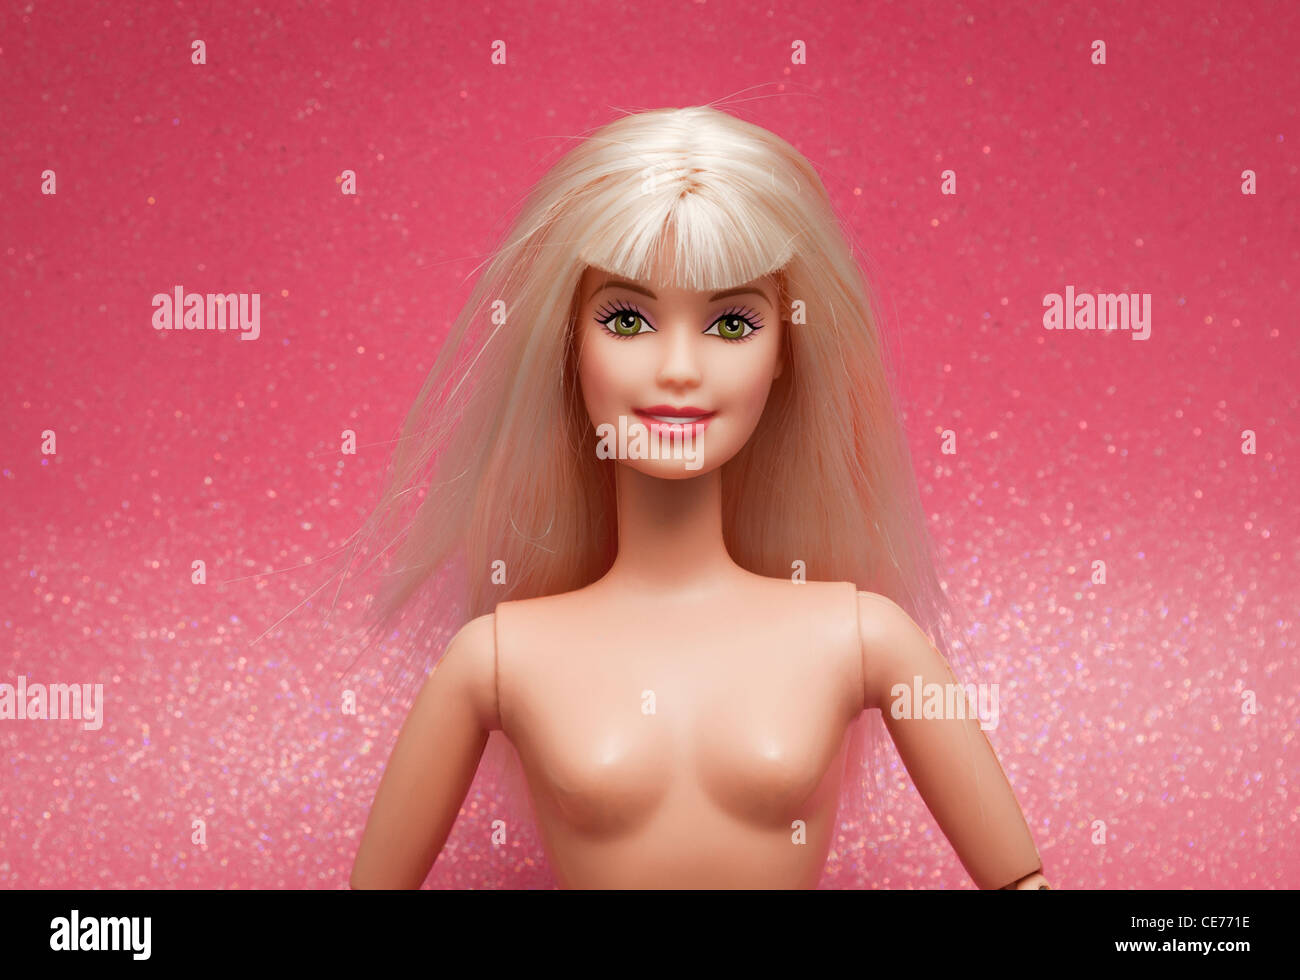 consultant Theoretical boss A typical Barbie doll, nude, against a pink sparkly background Stock Photo  - Alamy